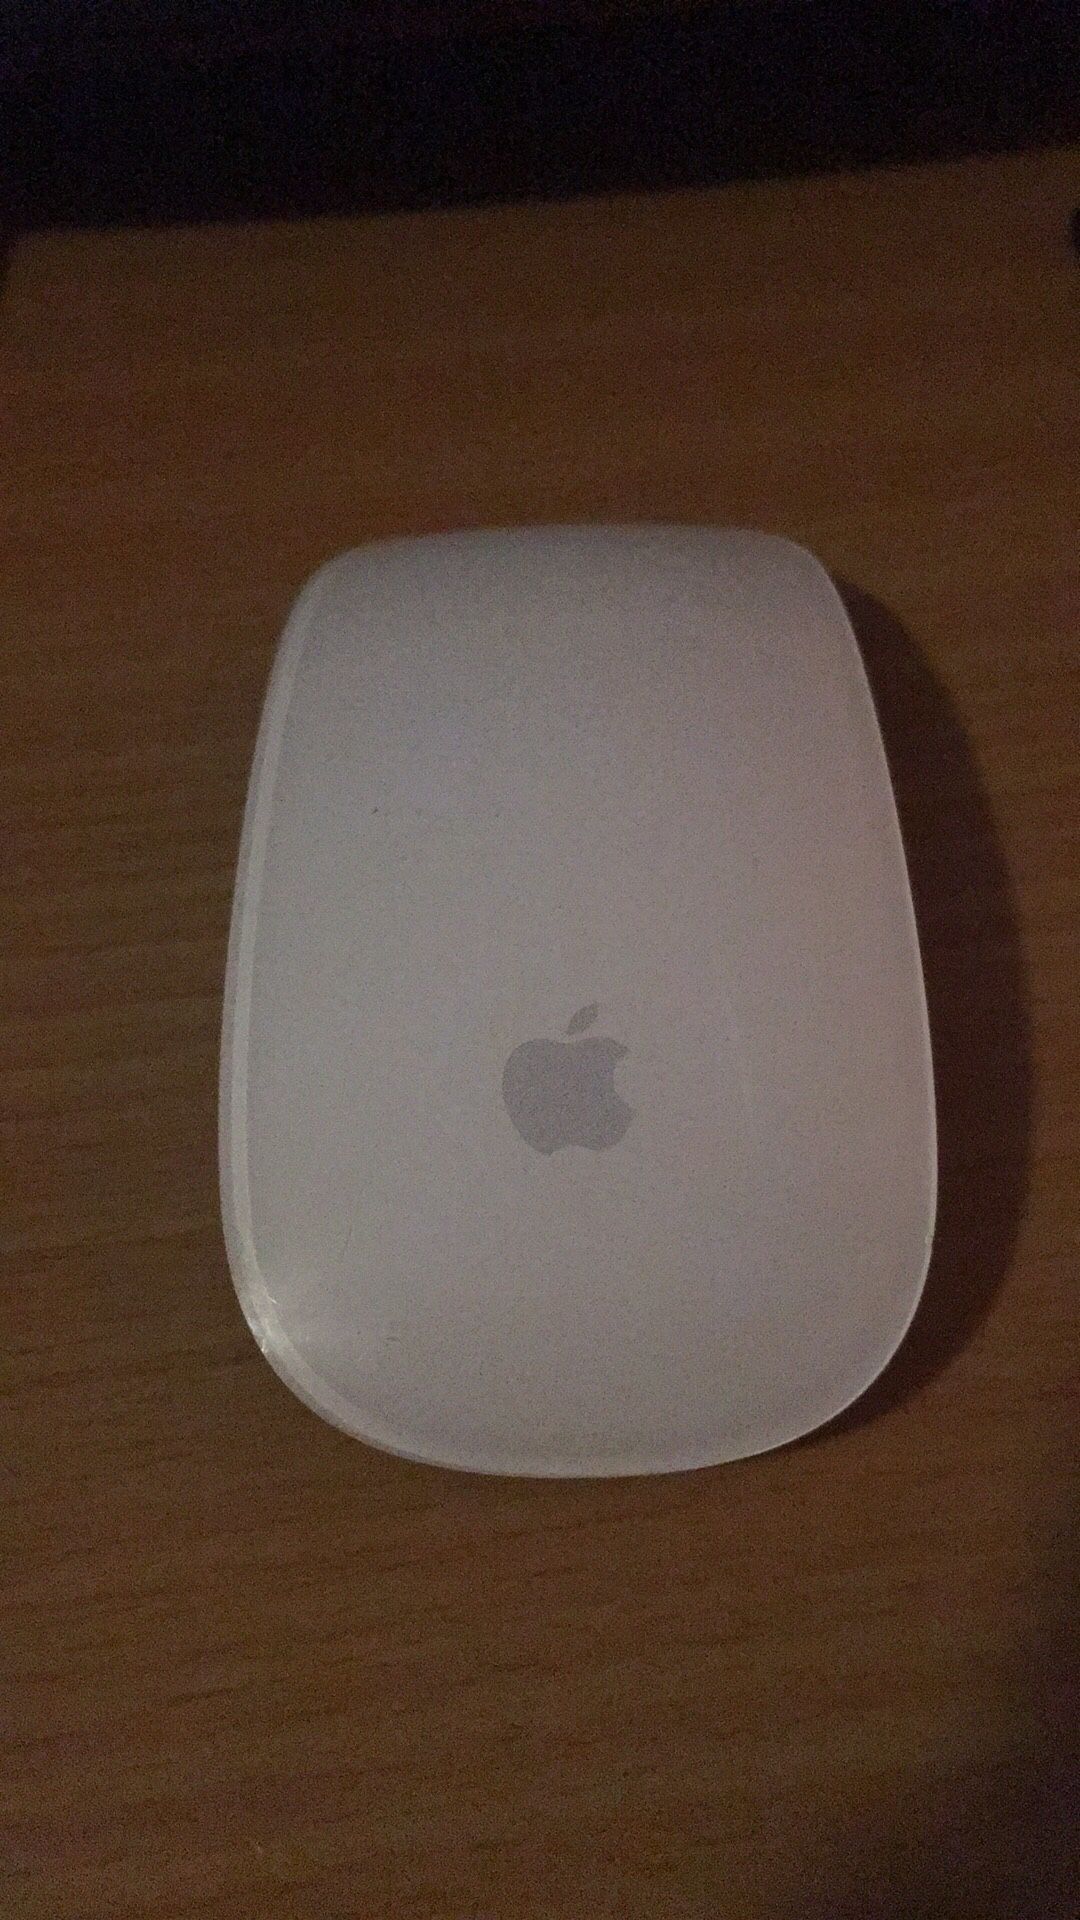 Apple mouse 1